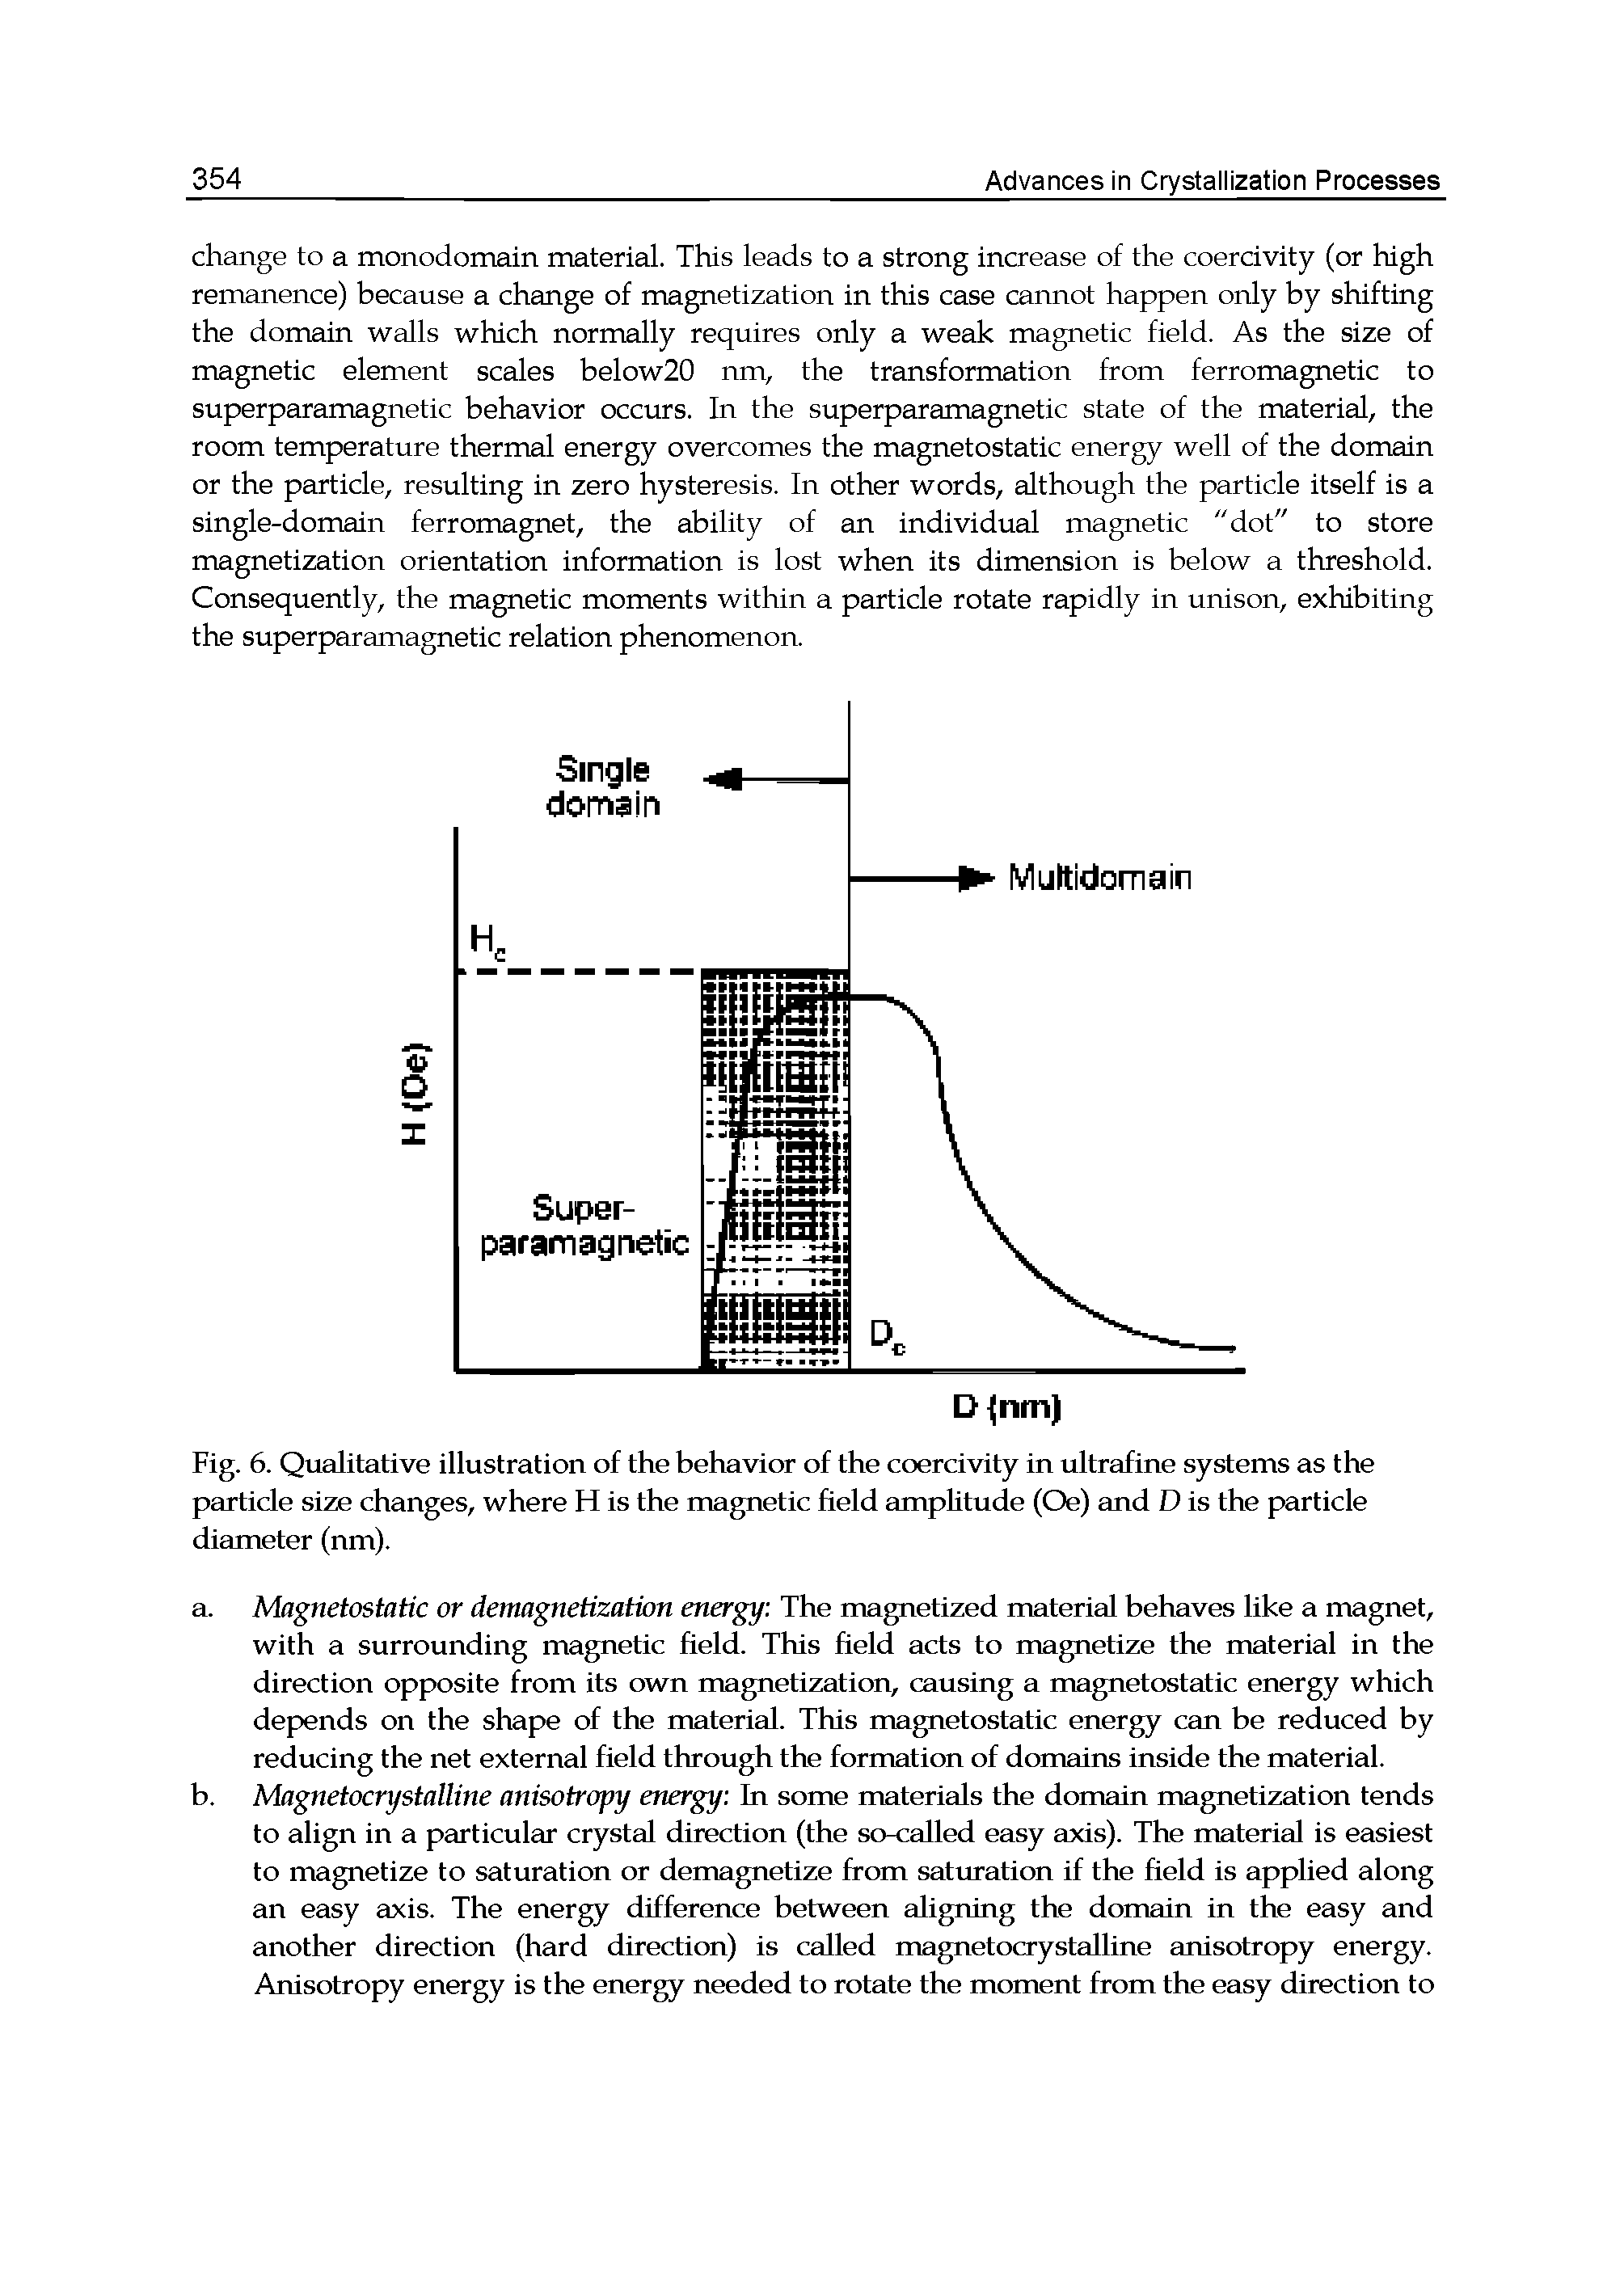 Fig. 6. Qualitative illustration of the behavior of the coercivity in ultrafme systems as the particle size changes, where H is the magnetic field amplitude (Oe) and D is the particle diameter (nm).